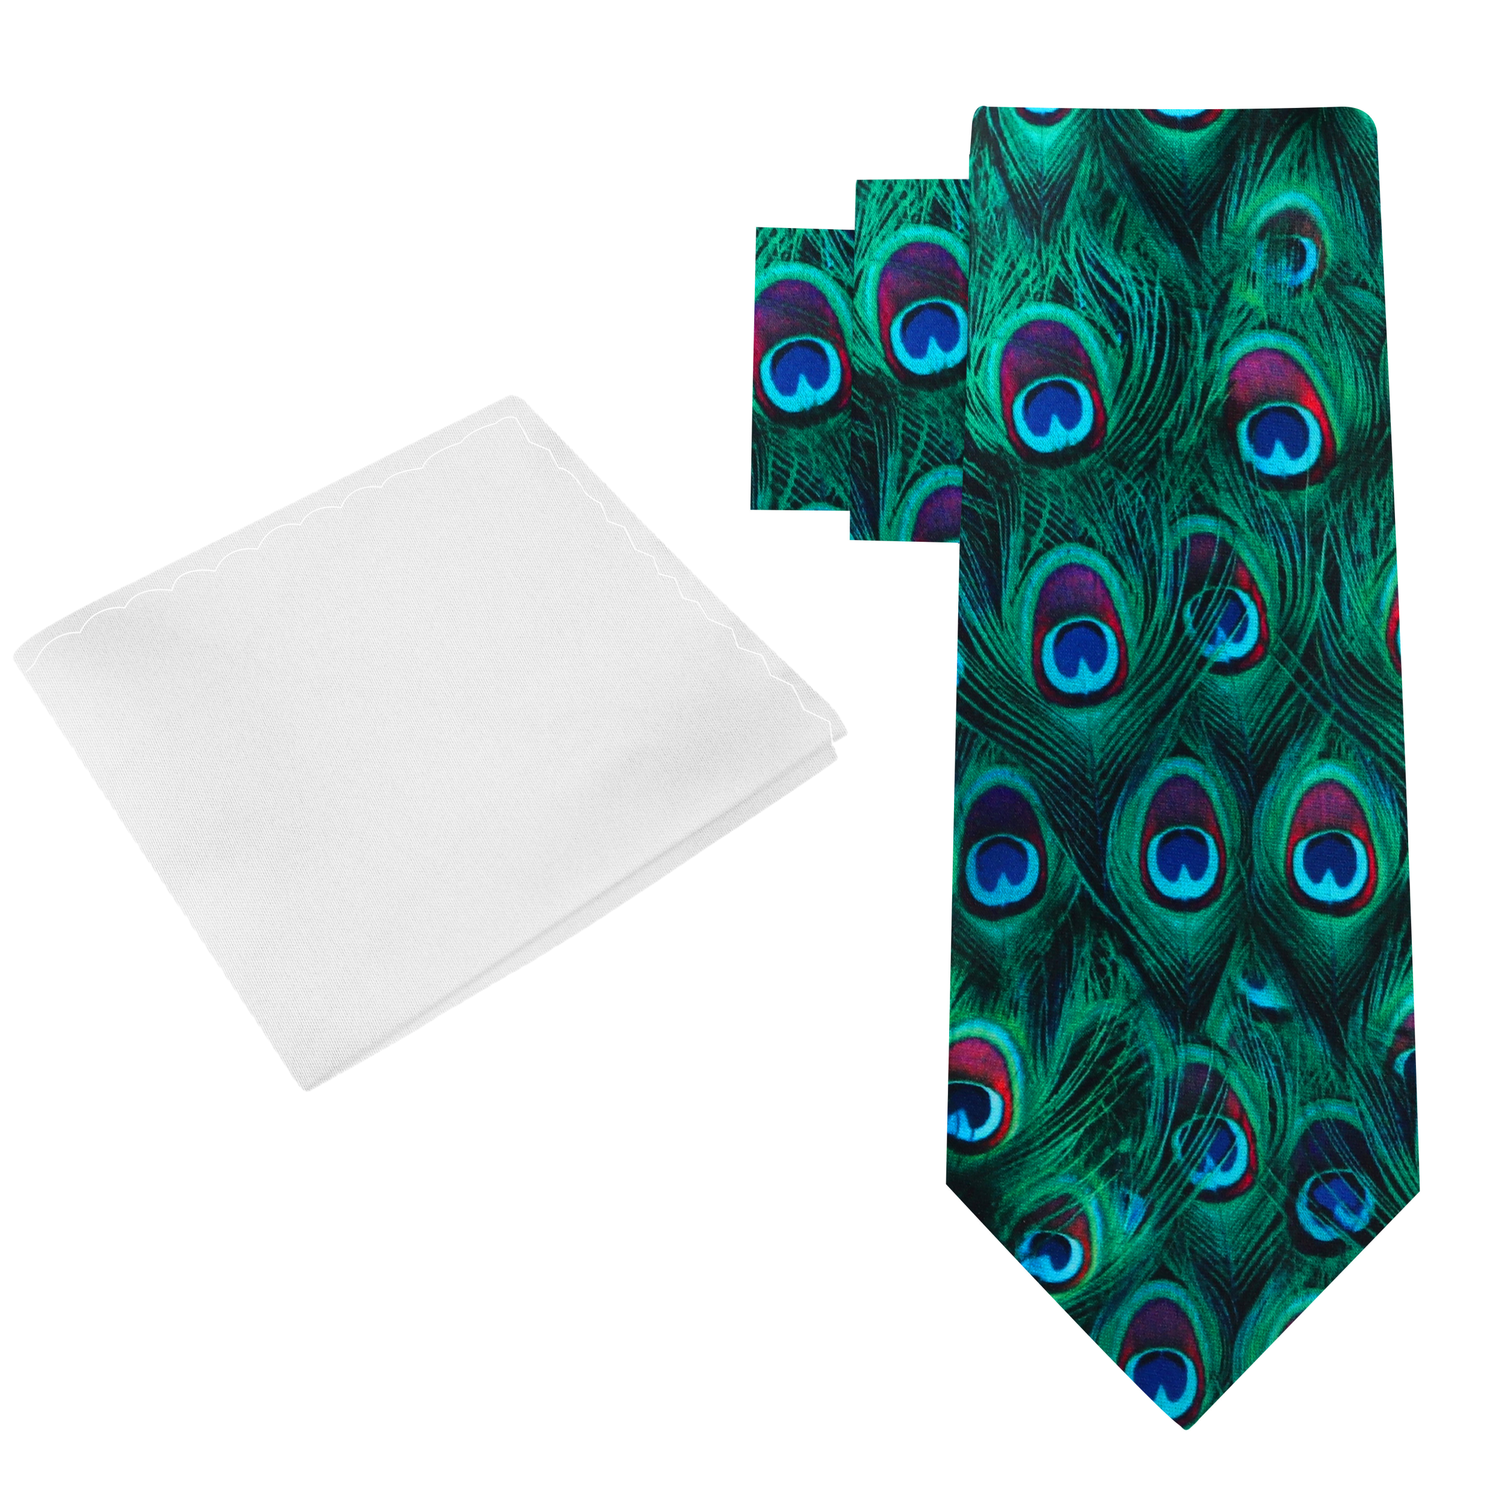 Alt View: Green, Blue, Red Peacock Feather Tie and White Square